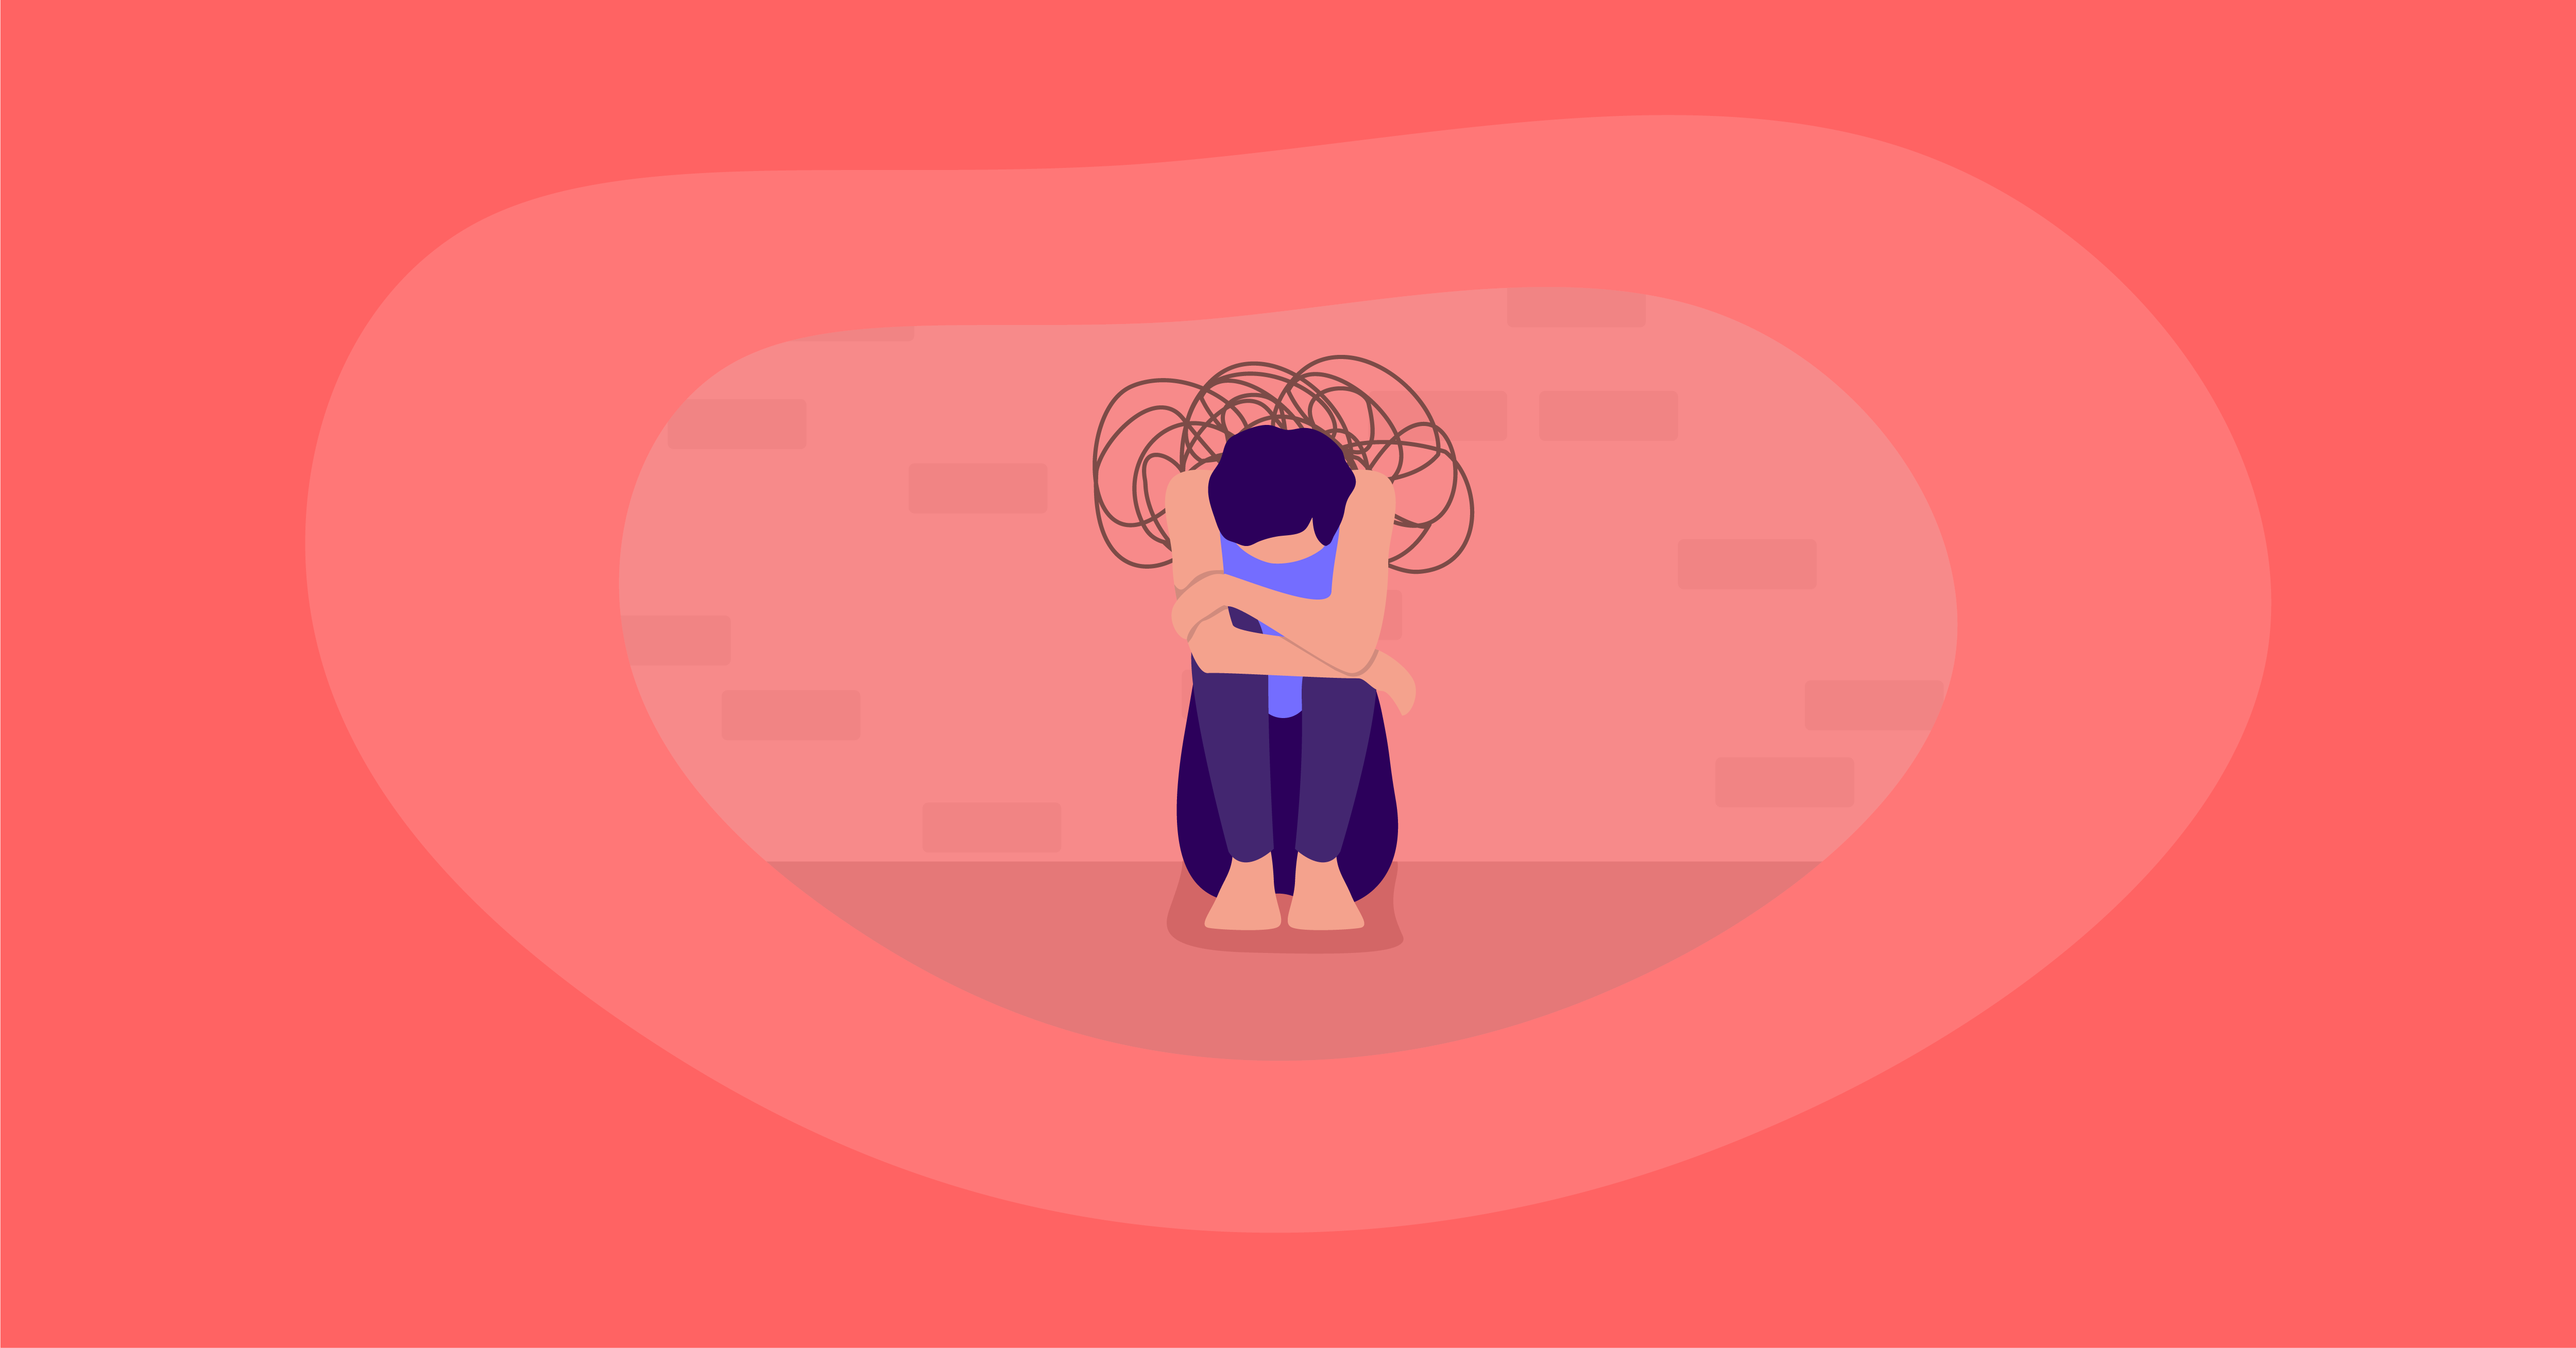 Attempted illustration of a person with depression